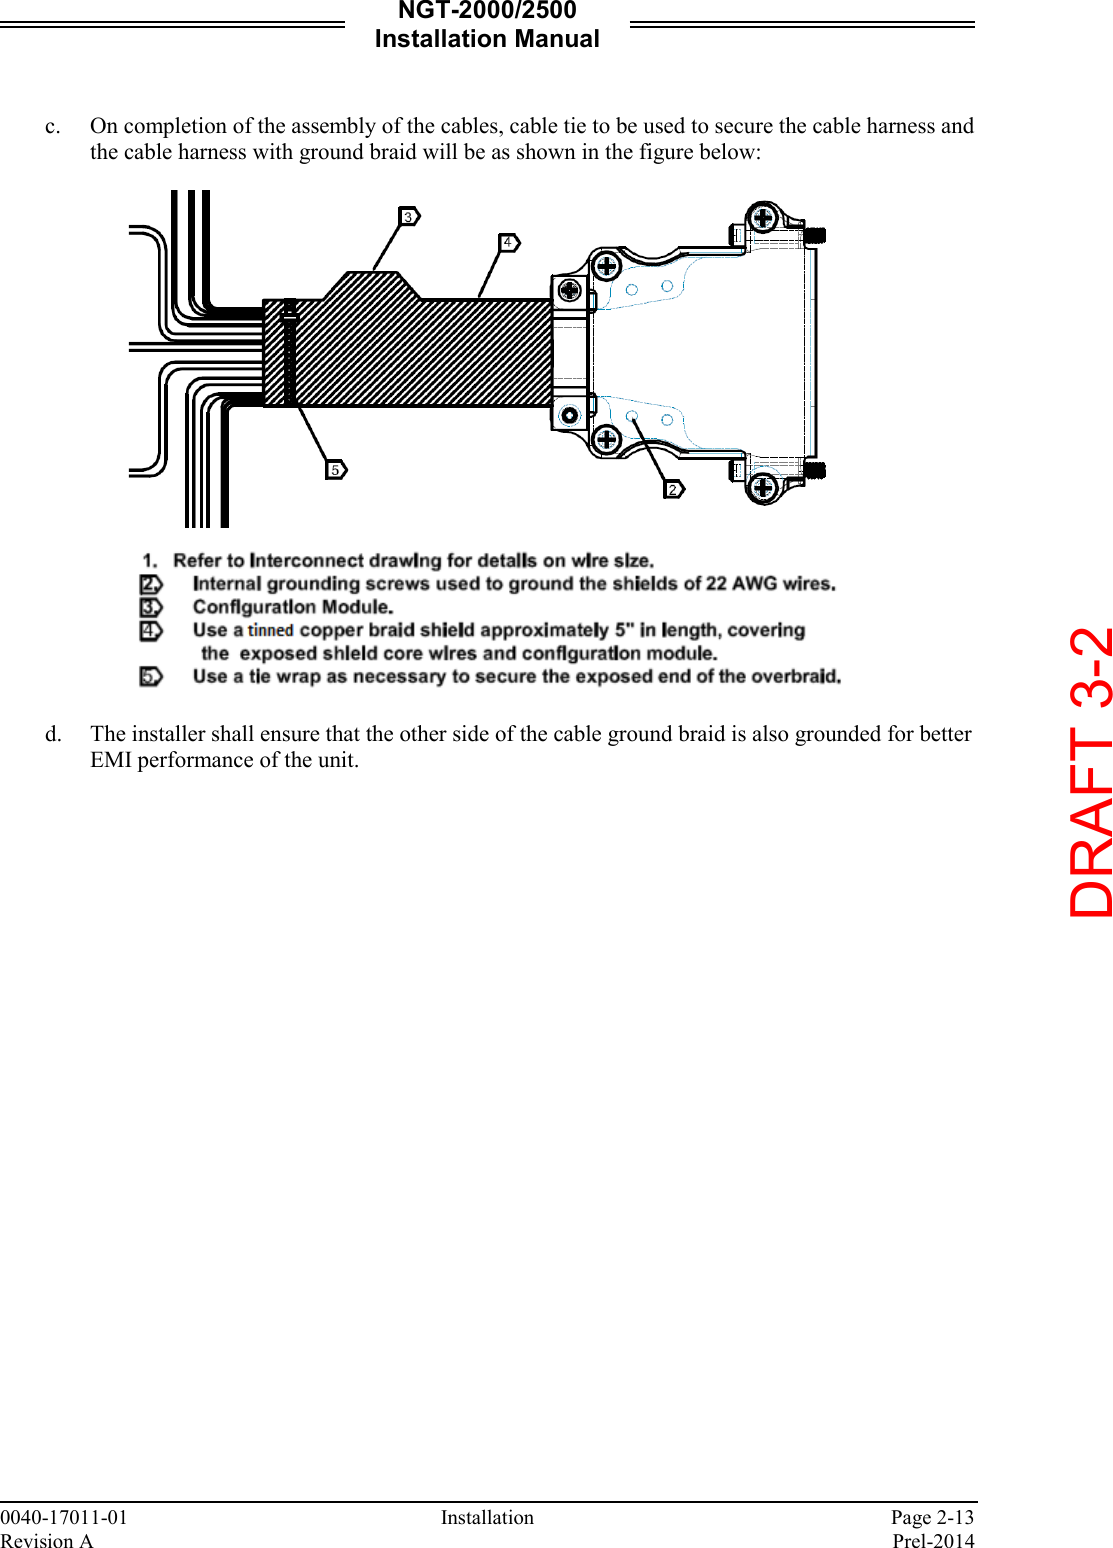 NGT-2000/2500 Installation Manual  0040-17011-01    Installation  Page 2-13 Revision A    Prel-2014  c. On completion of the assembly of the cables, cable tie to be used to secure the cable harness and the cable harness with ground braid will be as shown in the figure below:      d. The installer shall ensure that the other side of the cable ground braid is also grounded for better EMI performance of the unit.       DRAFT 3-2